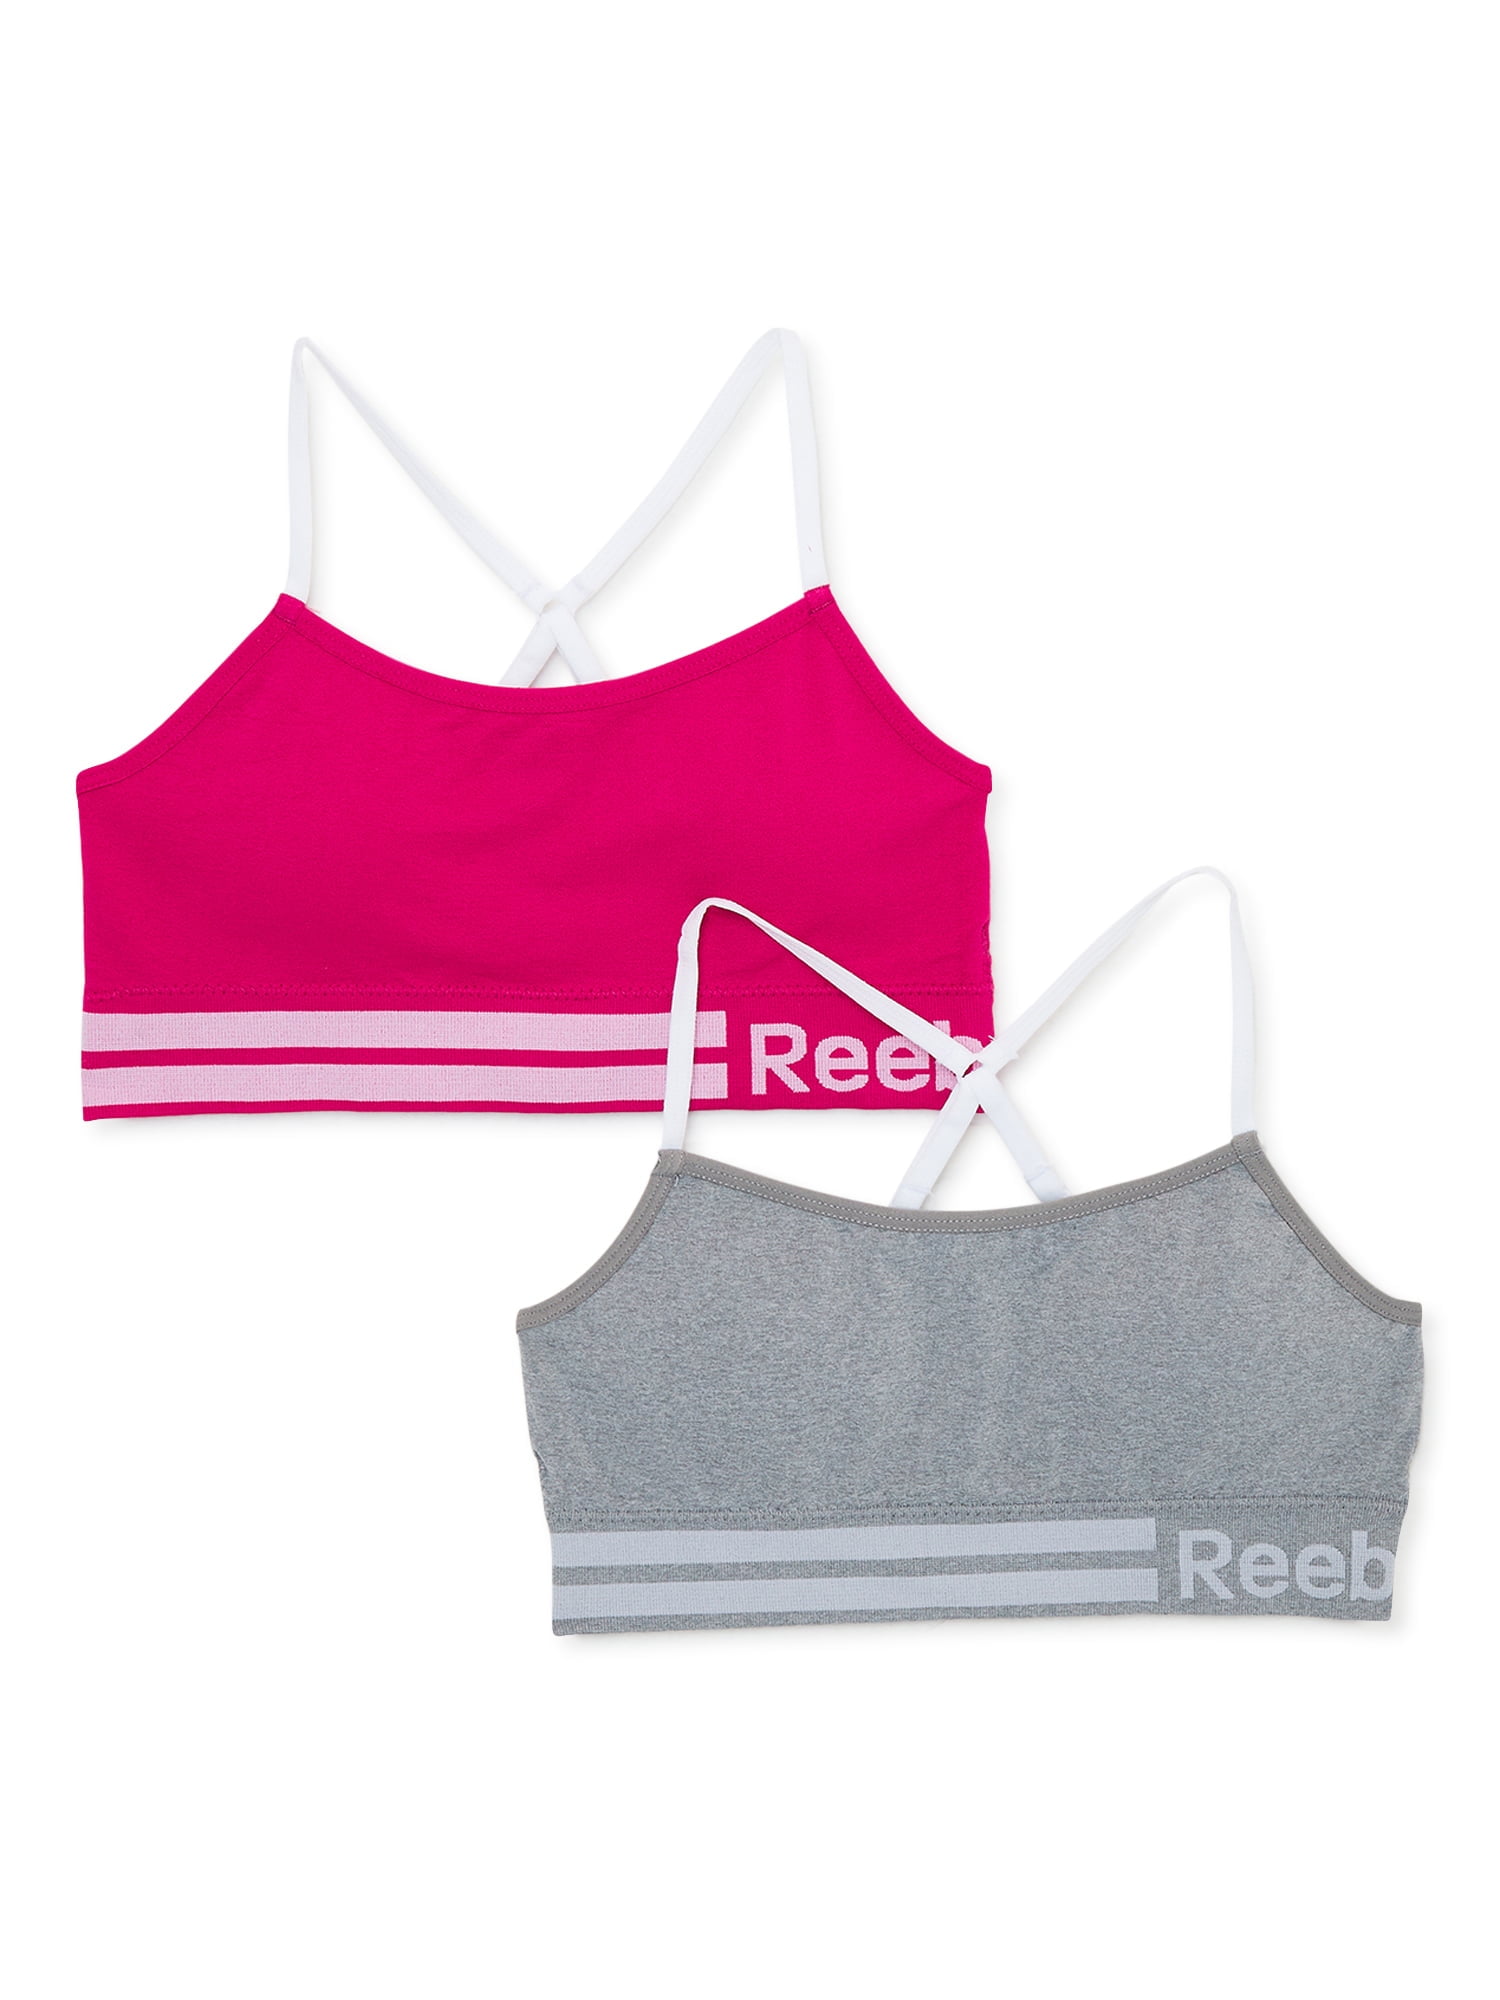 Reebok Girl's Seamless Longline Bralettes, 2-Pack, Sizes S to XL 